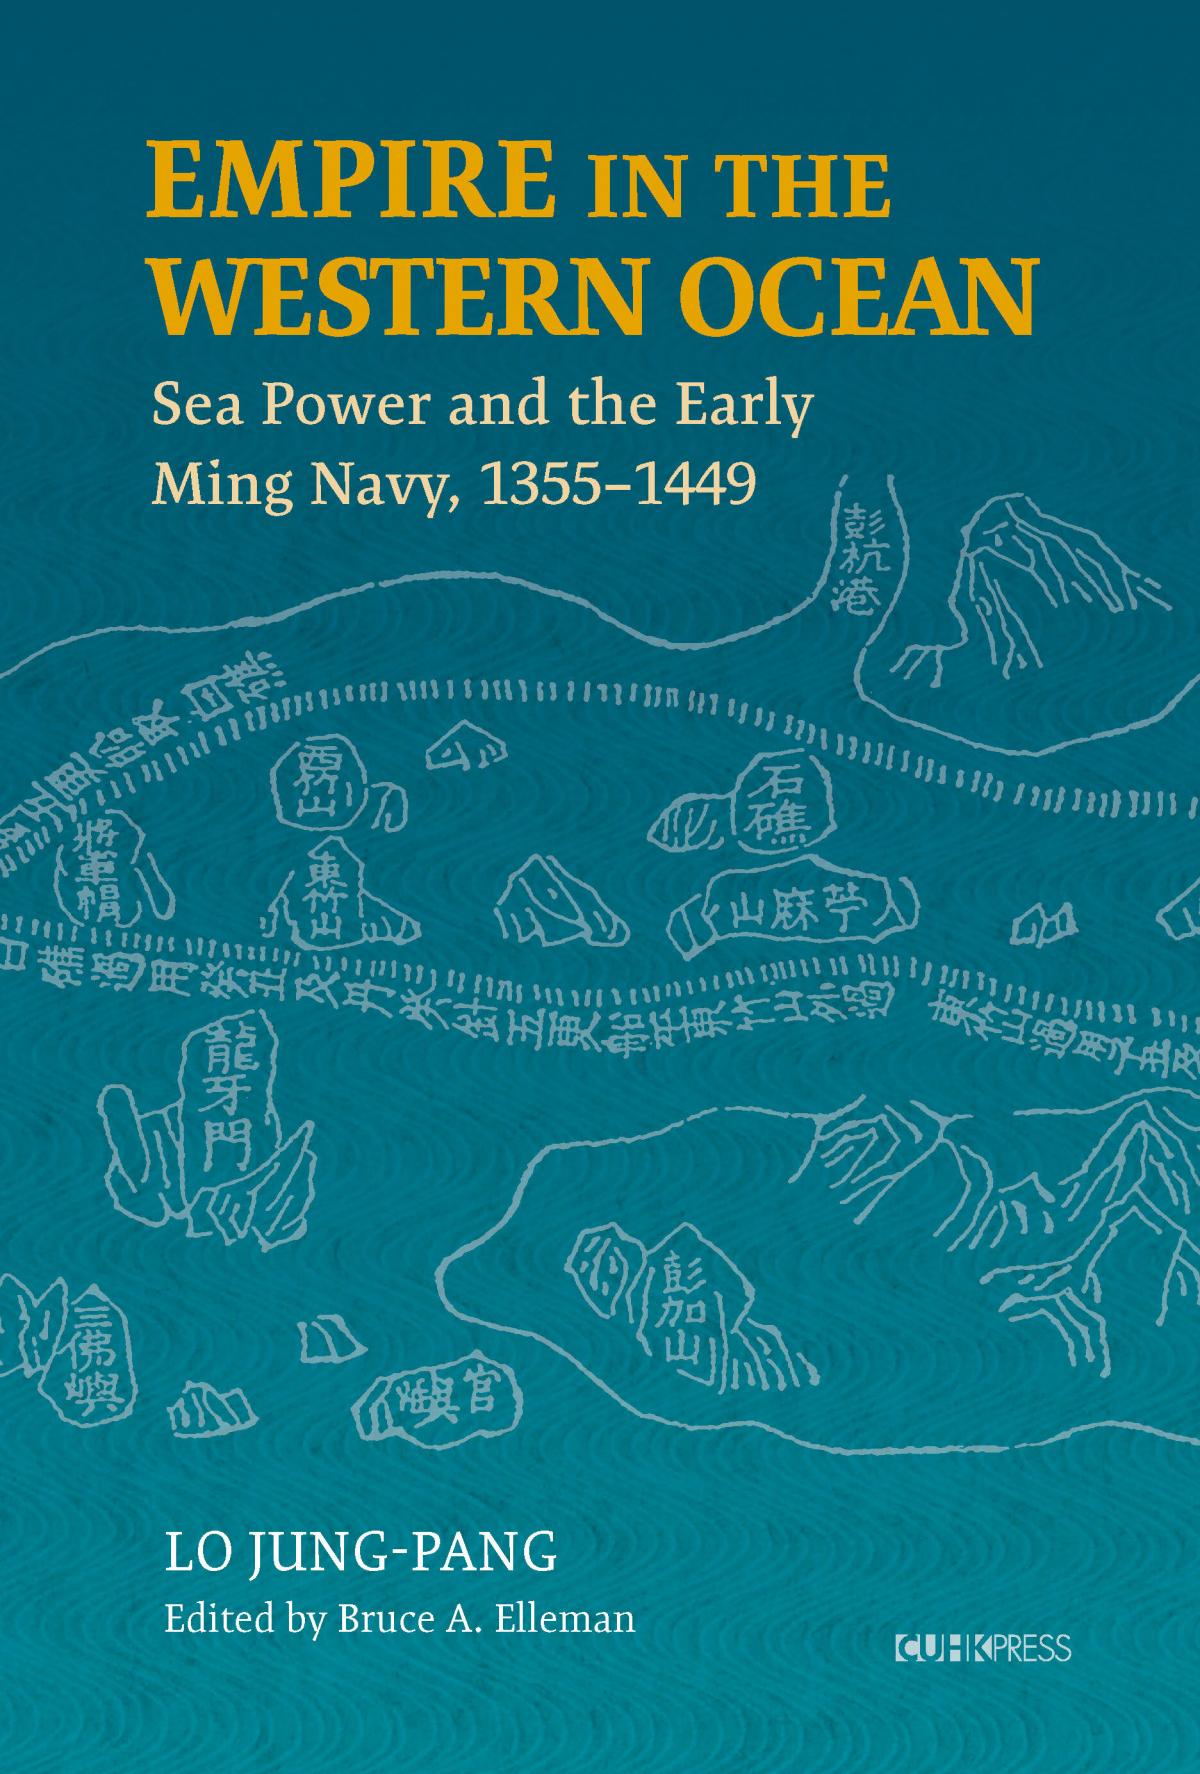 Empire in the Western Ocean: Sea Power and the Early Ming Navy, 1355–1449︳Edited by Bruce A. Elleman